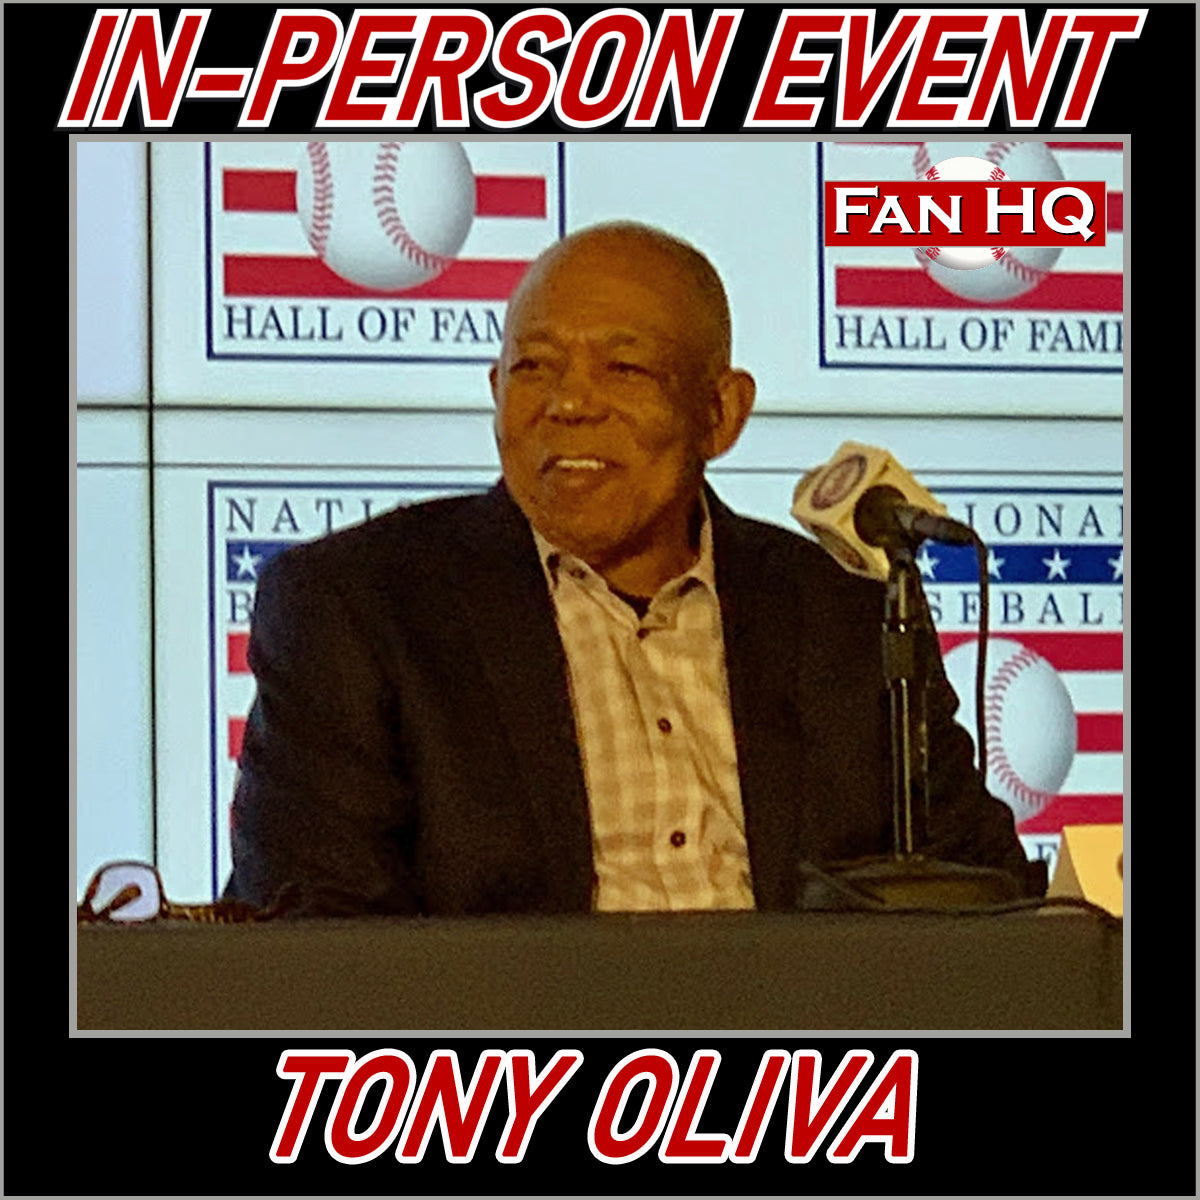 Tony Oliva's brother to witness Hall of Fame induction 